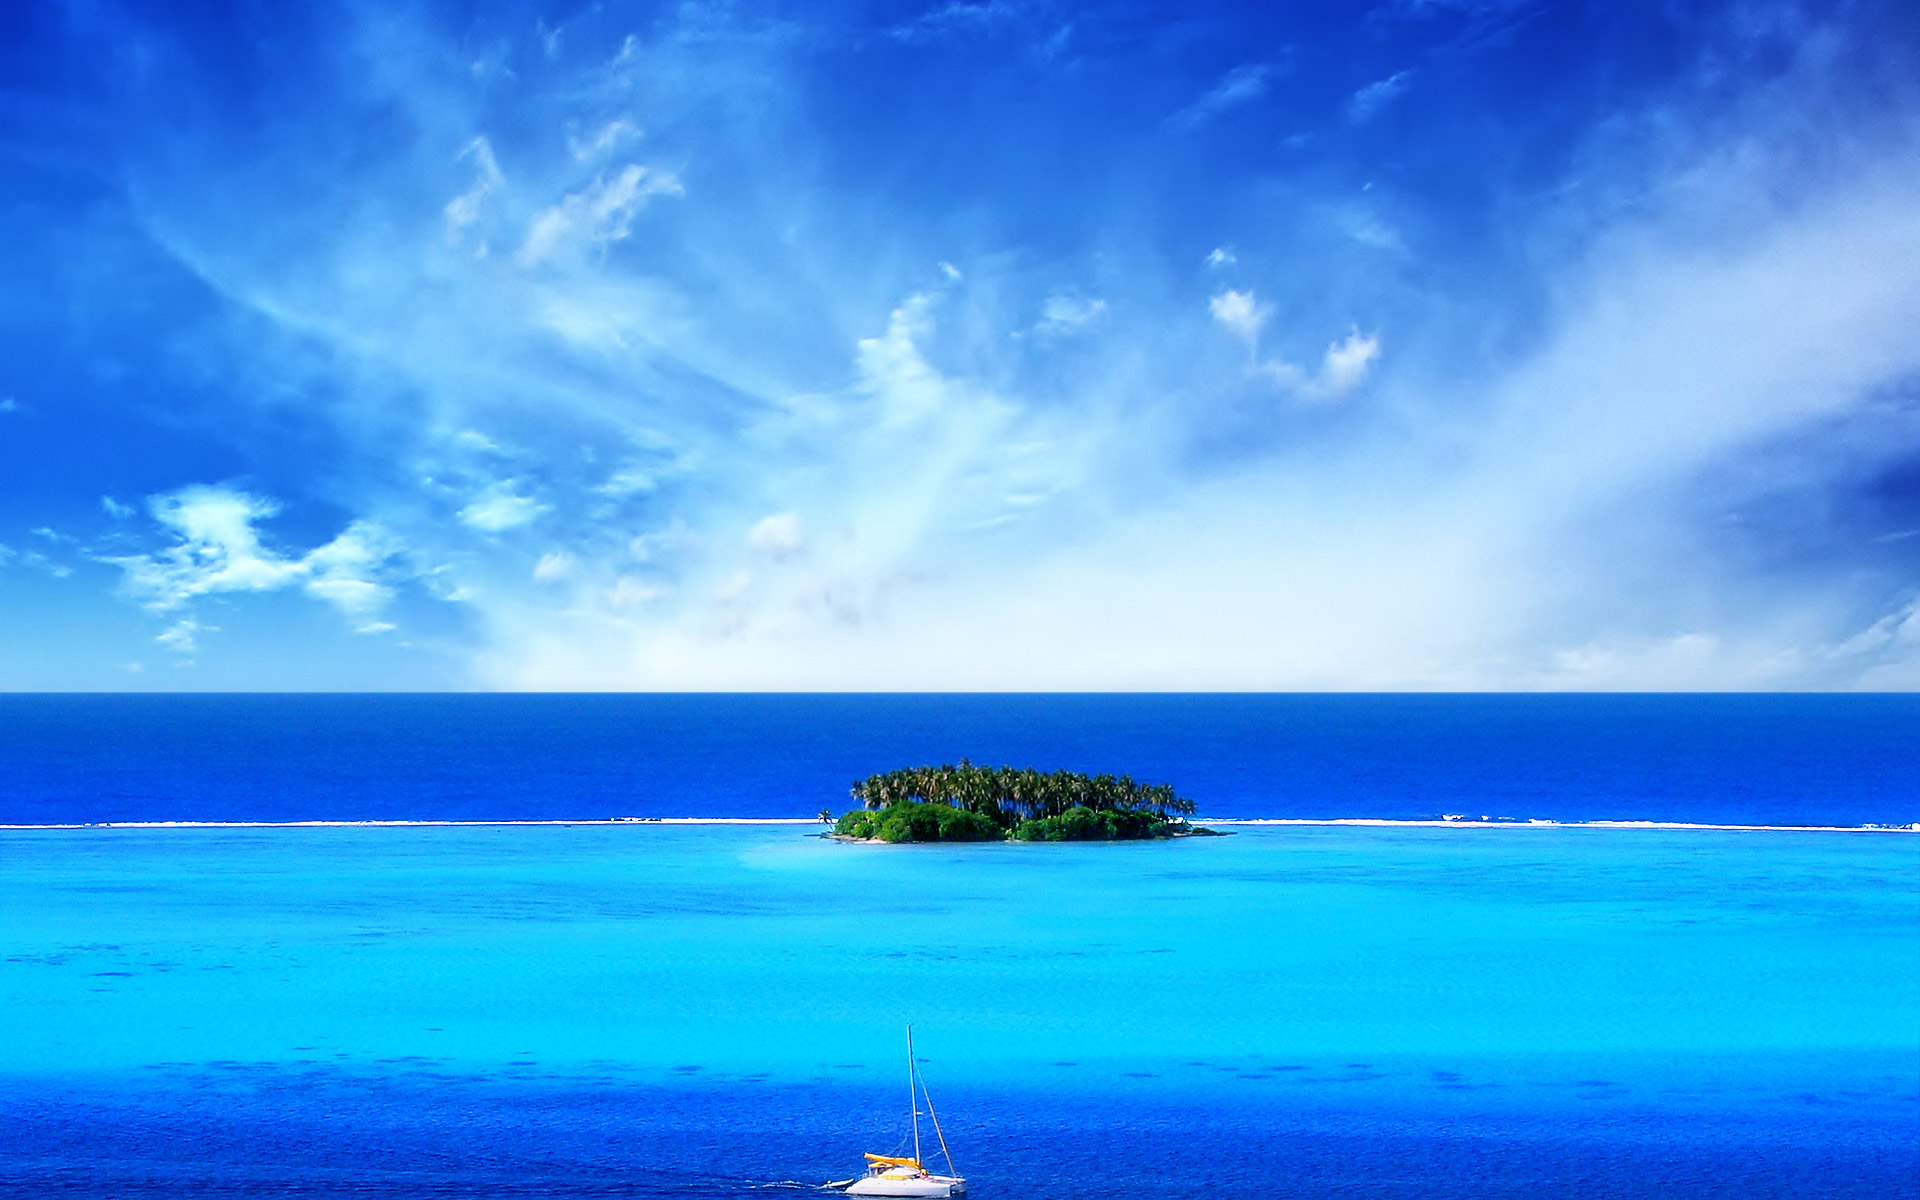  summer wallpapers category of hd wallpapers summer screensavers 1920x1200